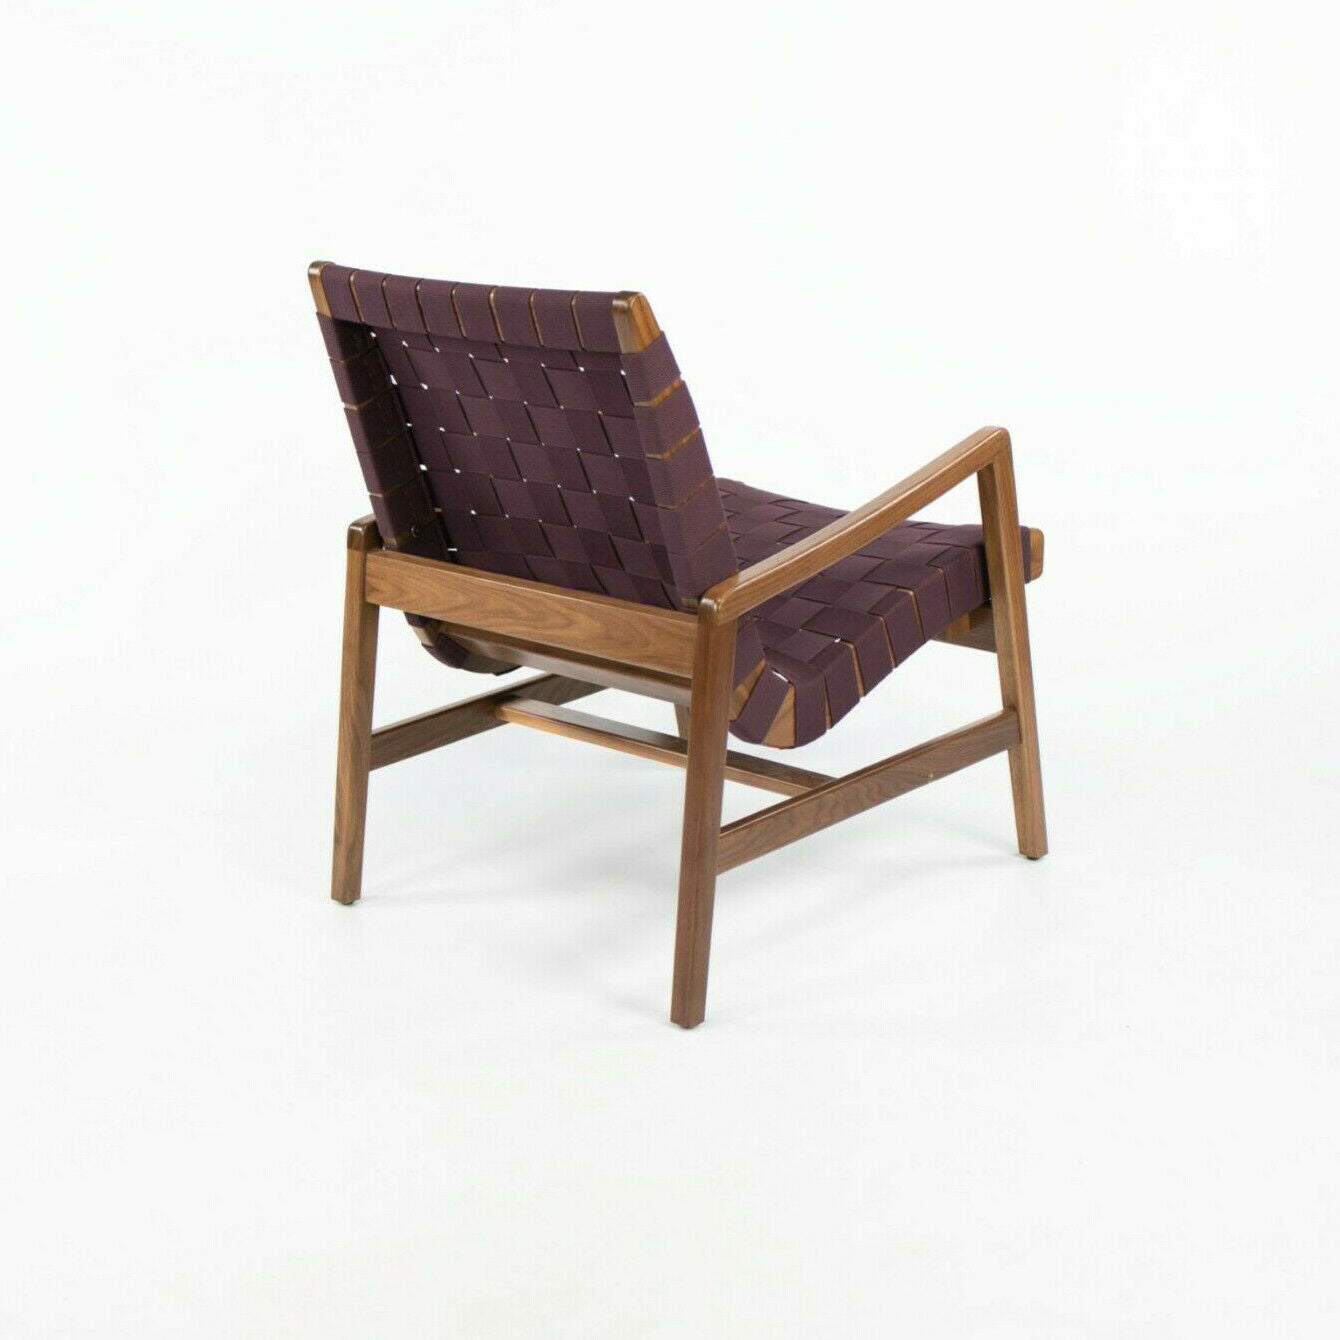 SOLD 2021 Jens Risom for Knoll Lounge Chair with Arms Light in Walnut with Aubergine Cotton